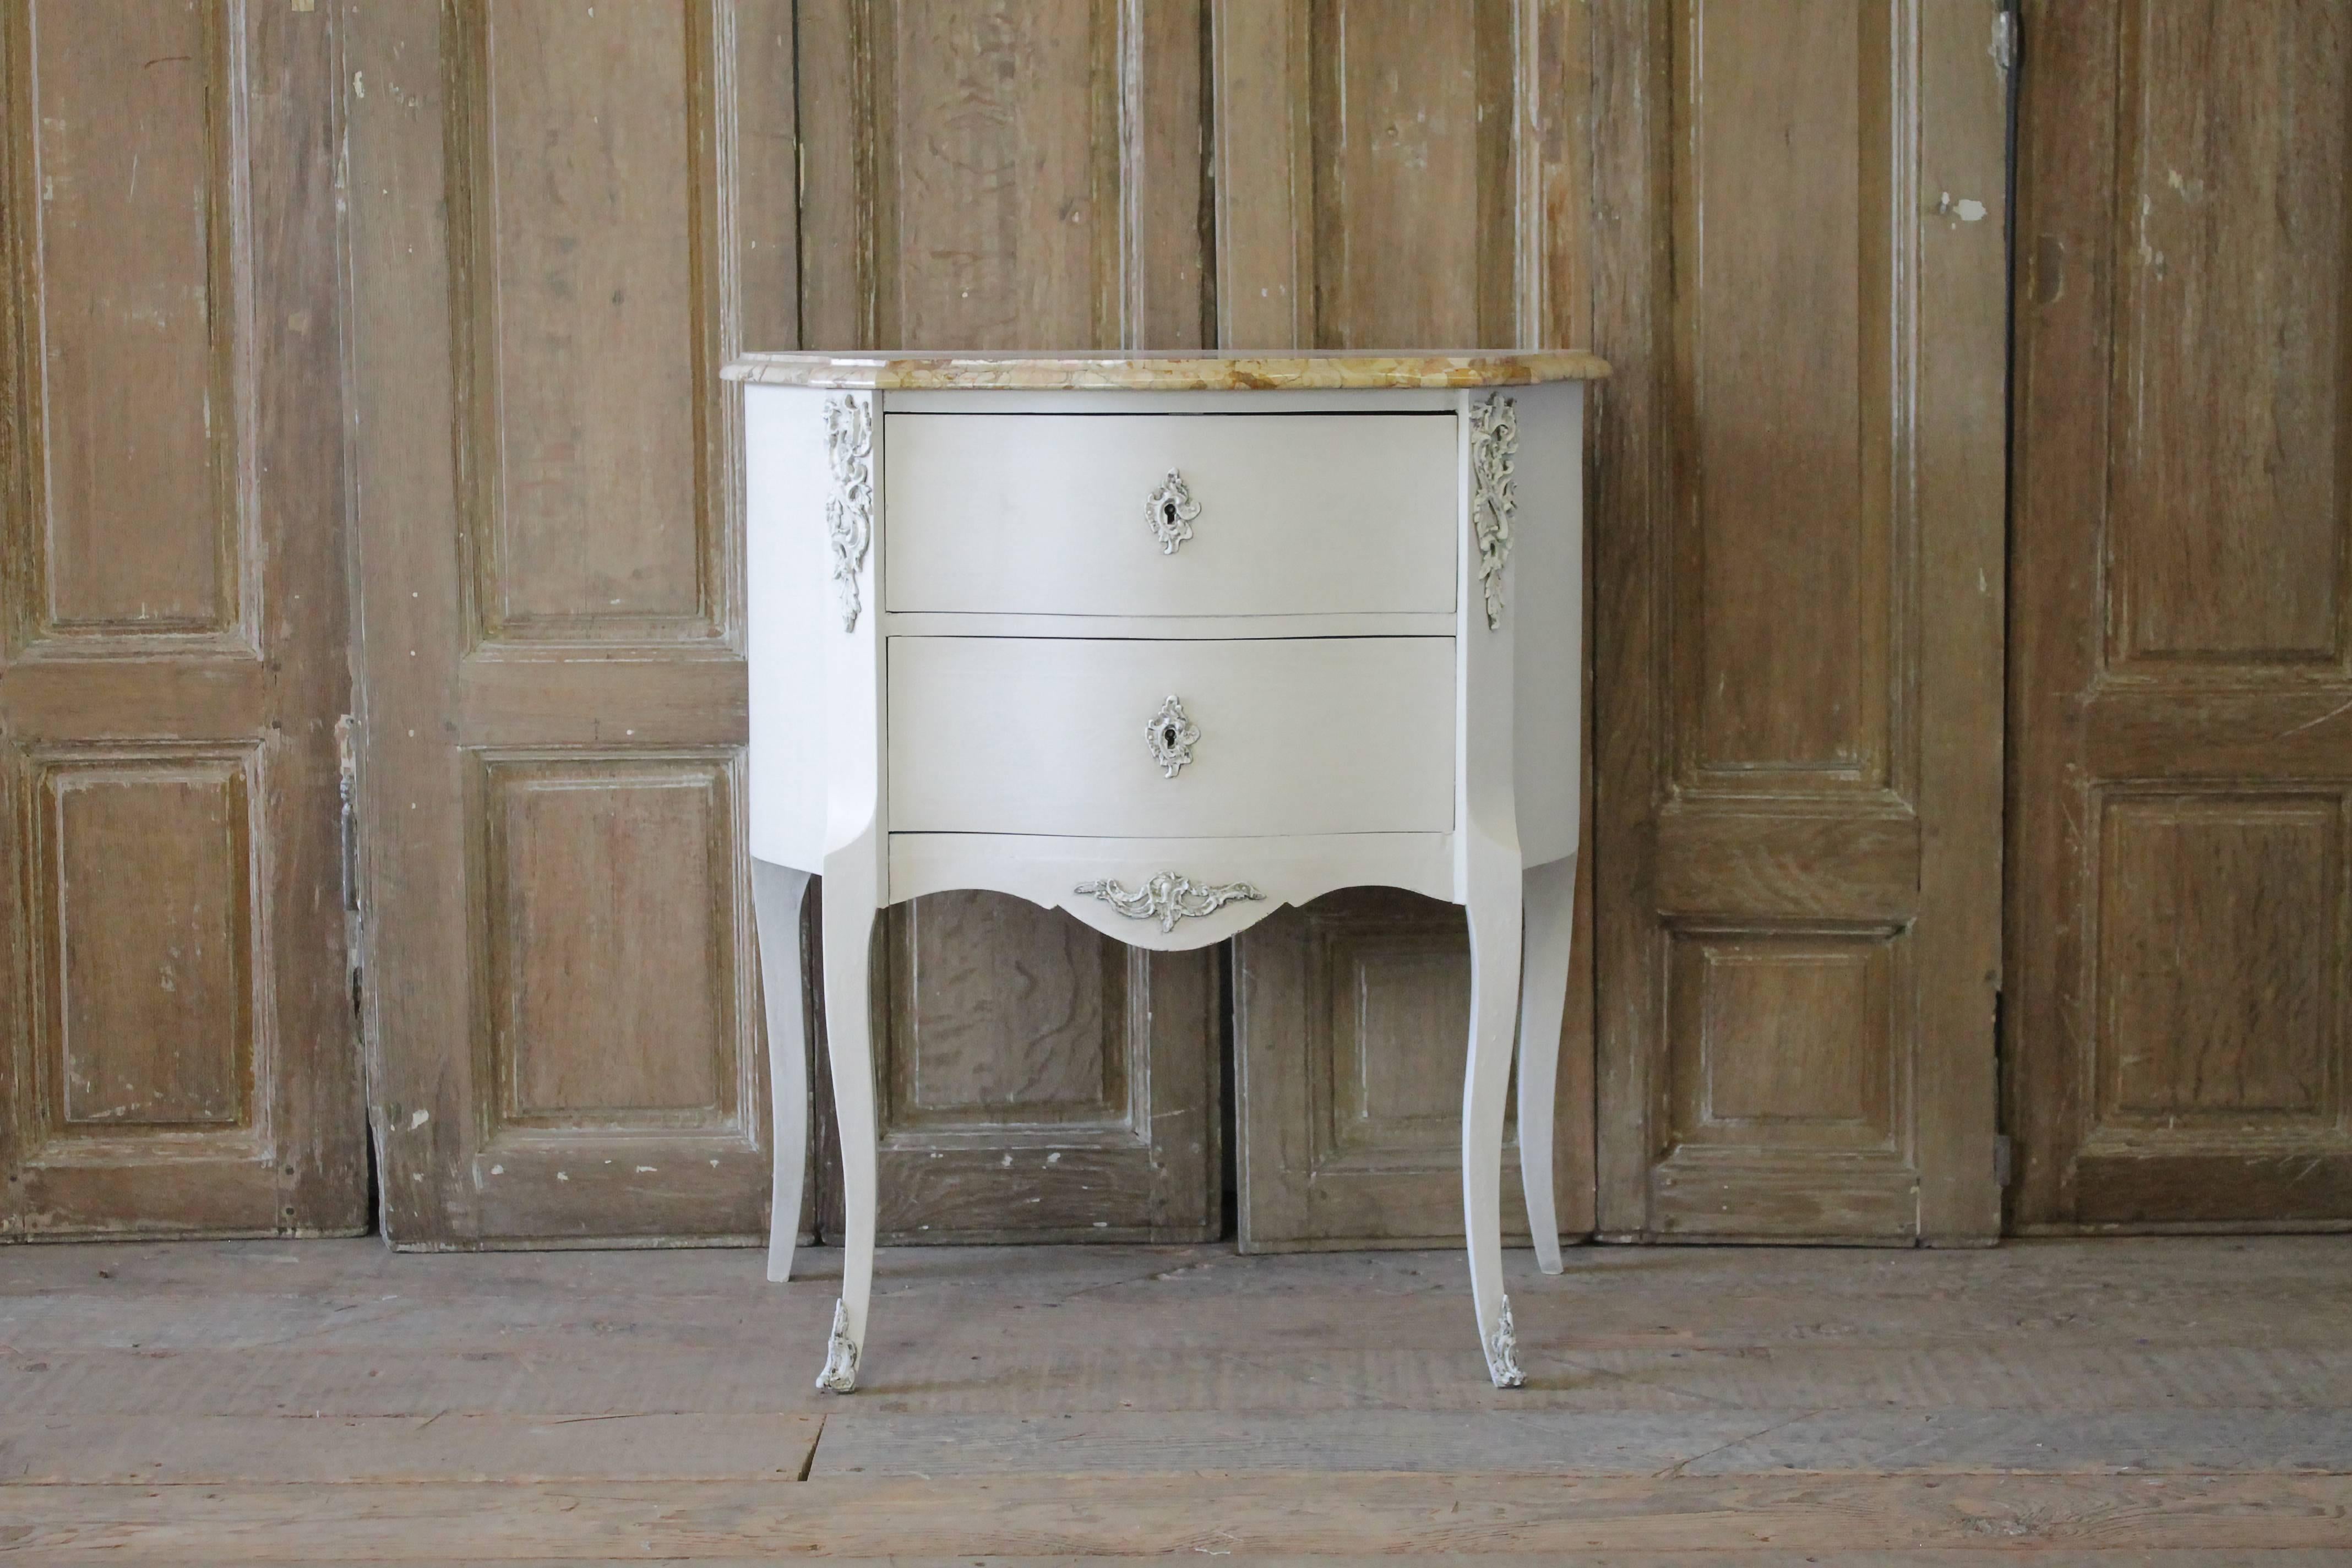 20th century painted French Louis XV style commode with marble top
Original working locking key and tassel, drawers open and close with ease. Drawers are finished with a dovetail construction. Original bronze-mounted ormolus and escutcheons painted